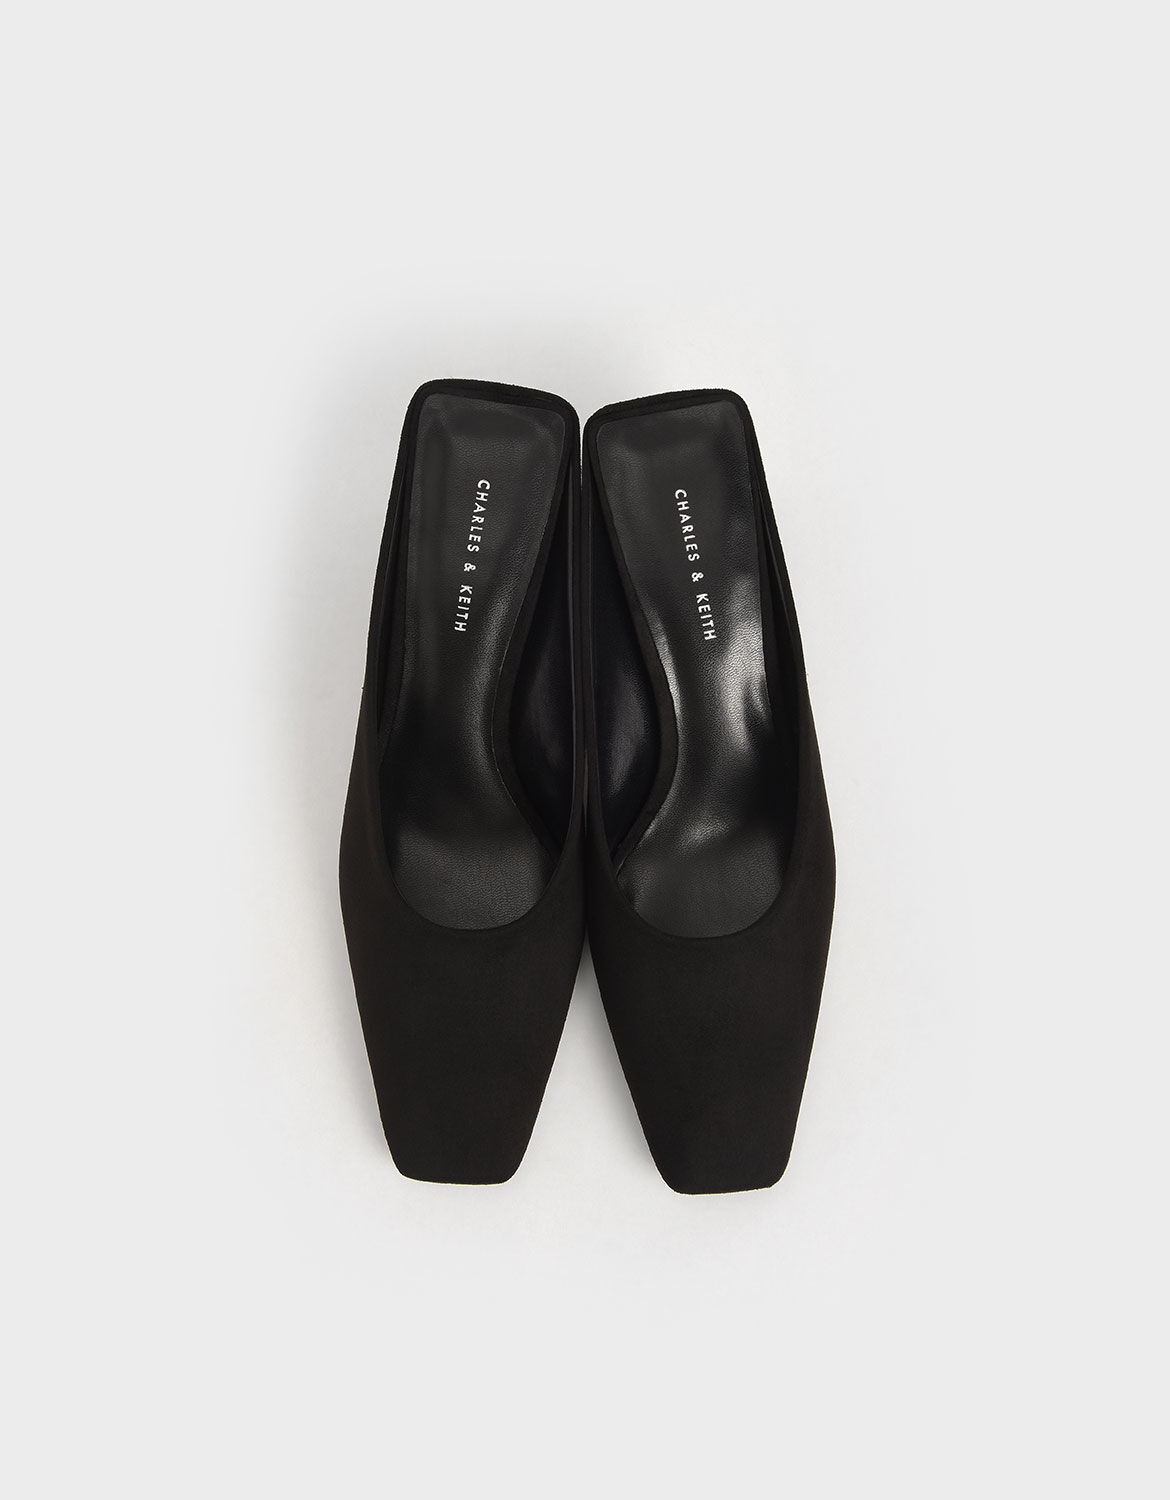 Shop Women's Shoes Online - CHARLES & KEITH USD